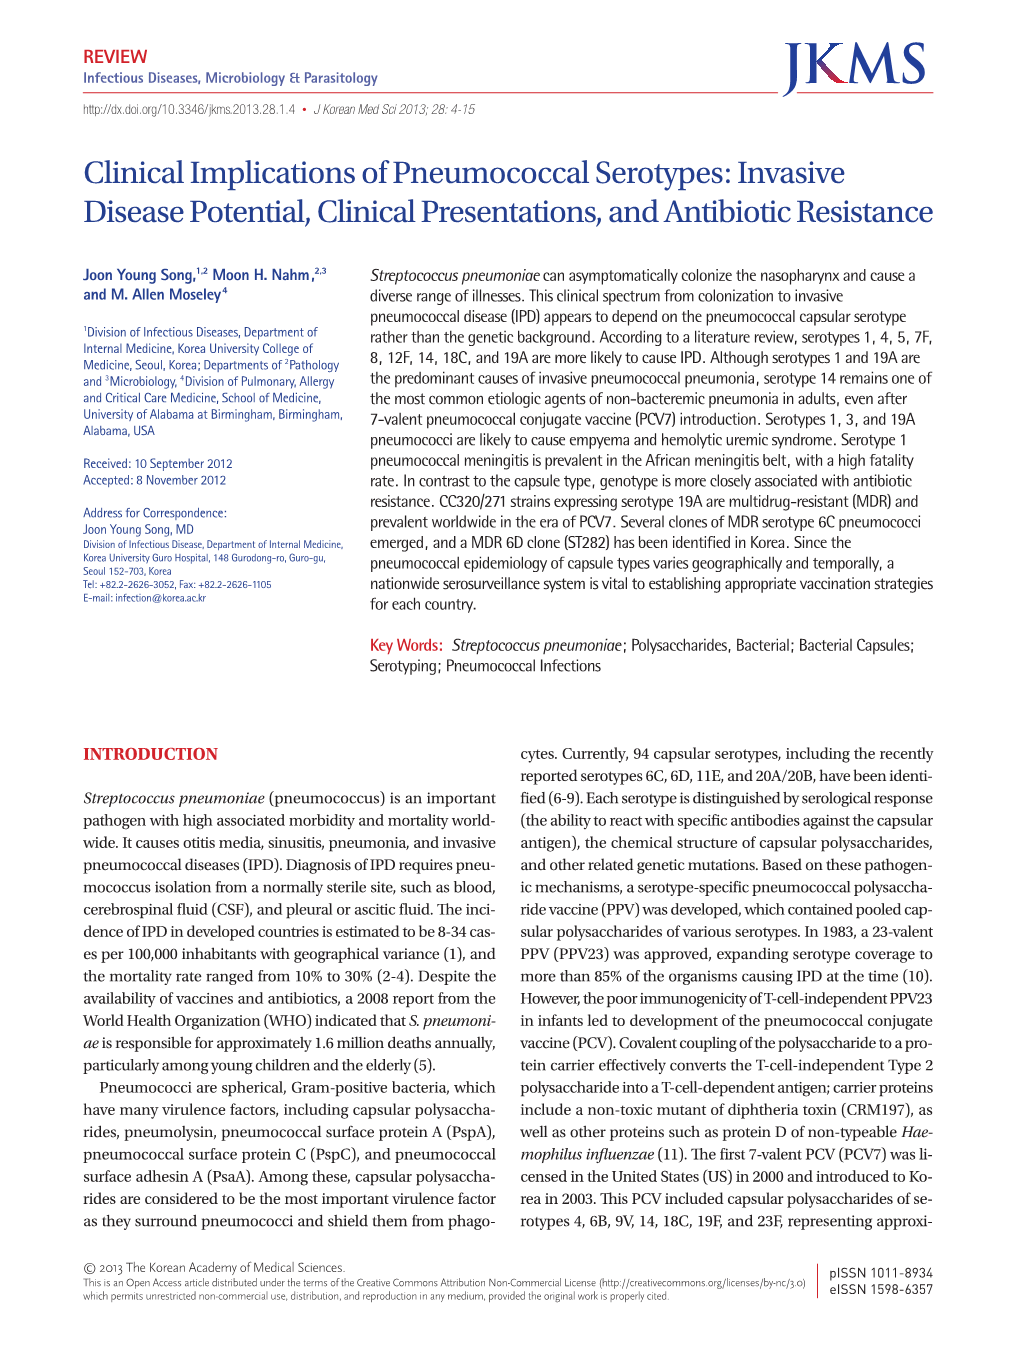 Clinical Implications of Pneumococcal Serotypes: Invasive Disease Potential, Clinical Presentations, and Antibiotic Resistance